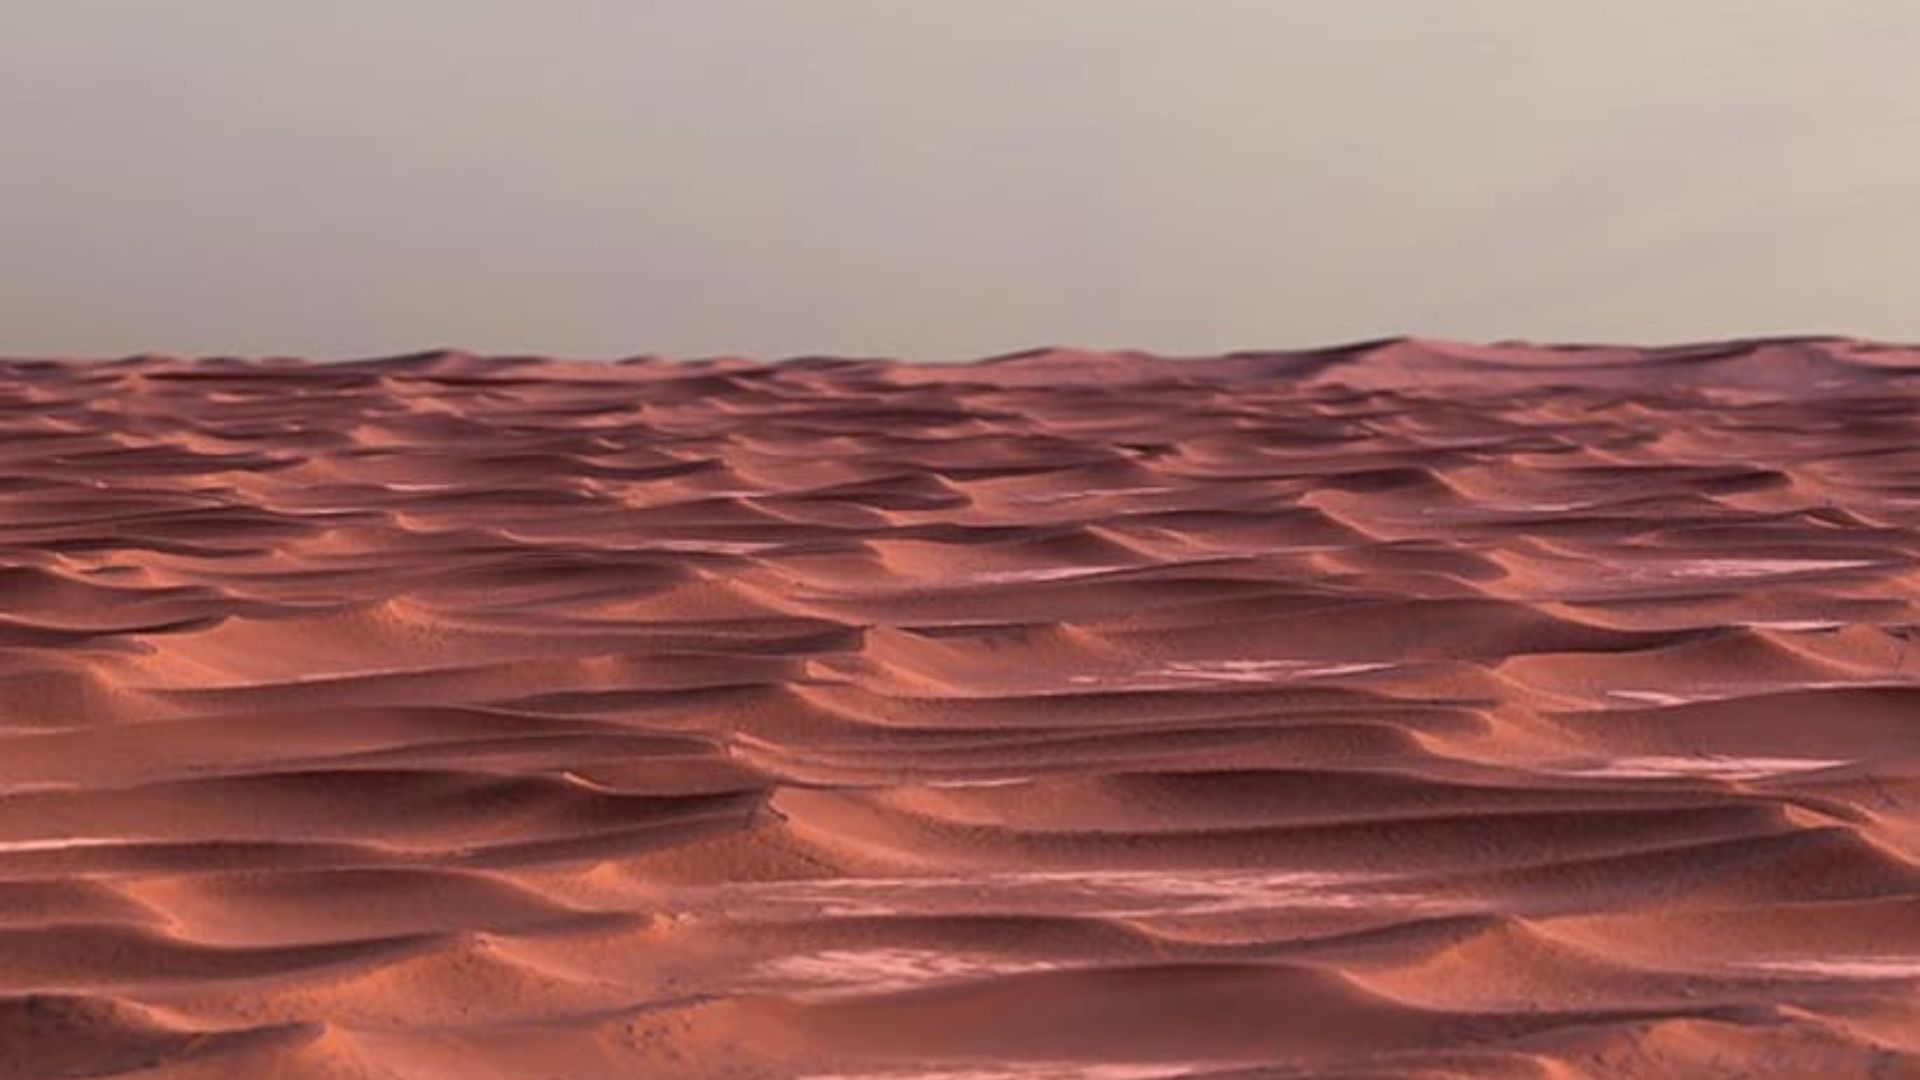 Israeli Study Reveals Unified Theory for Sand Ripples Across Planets